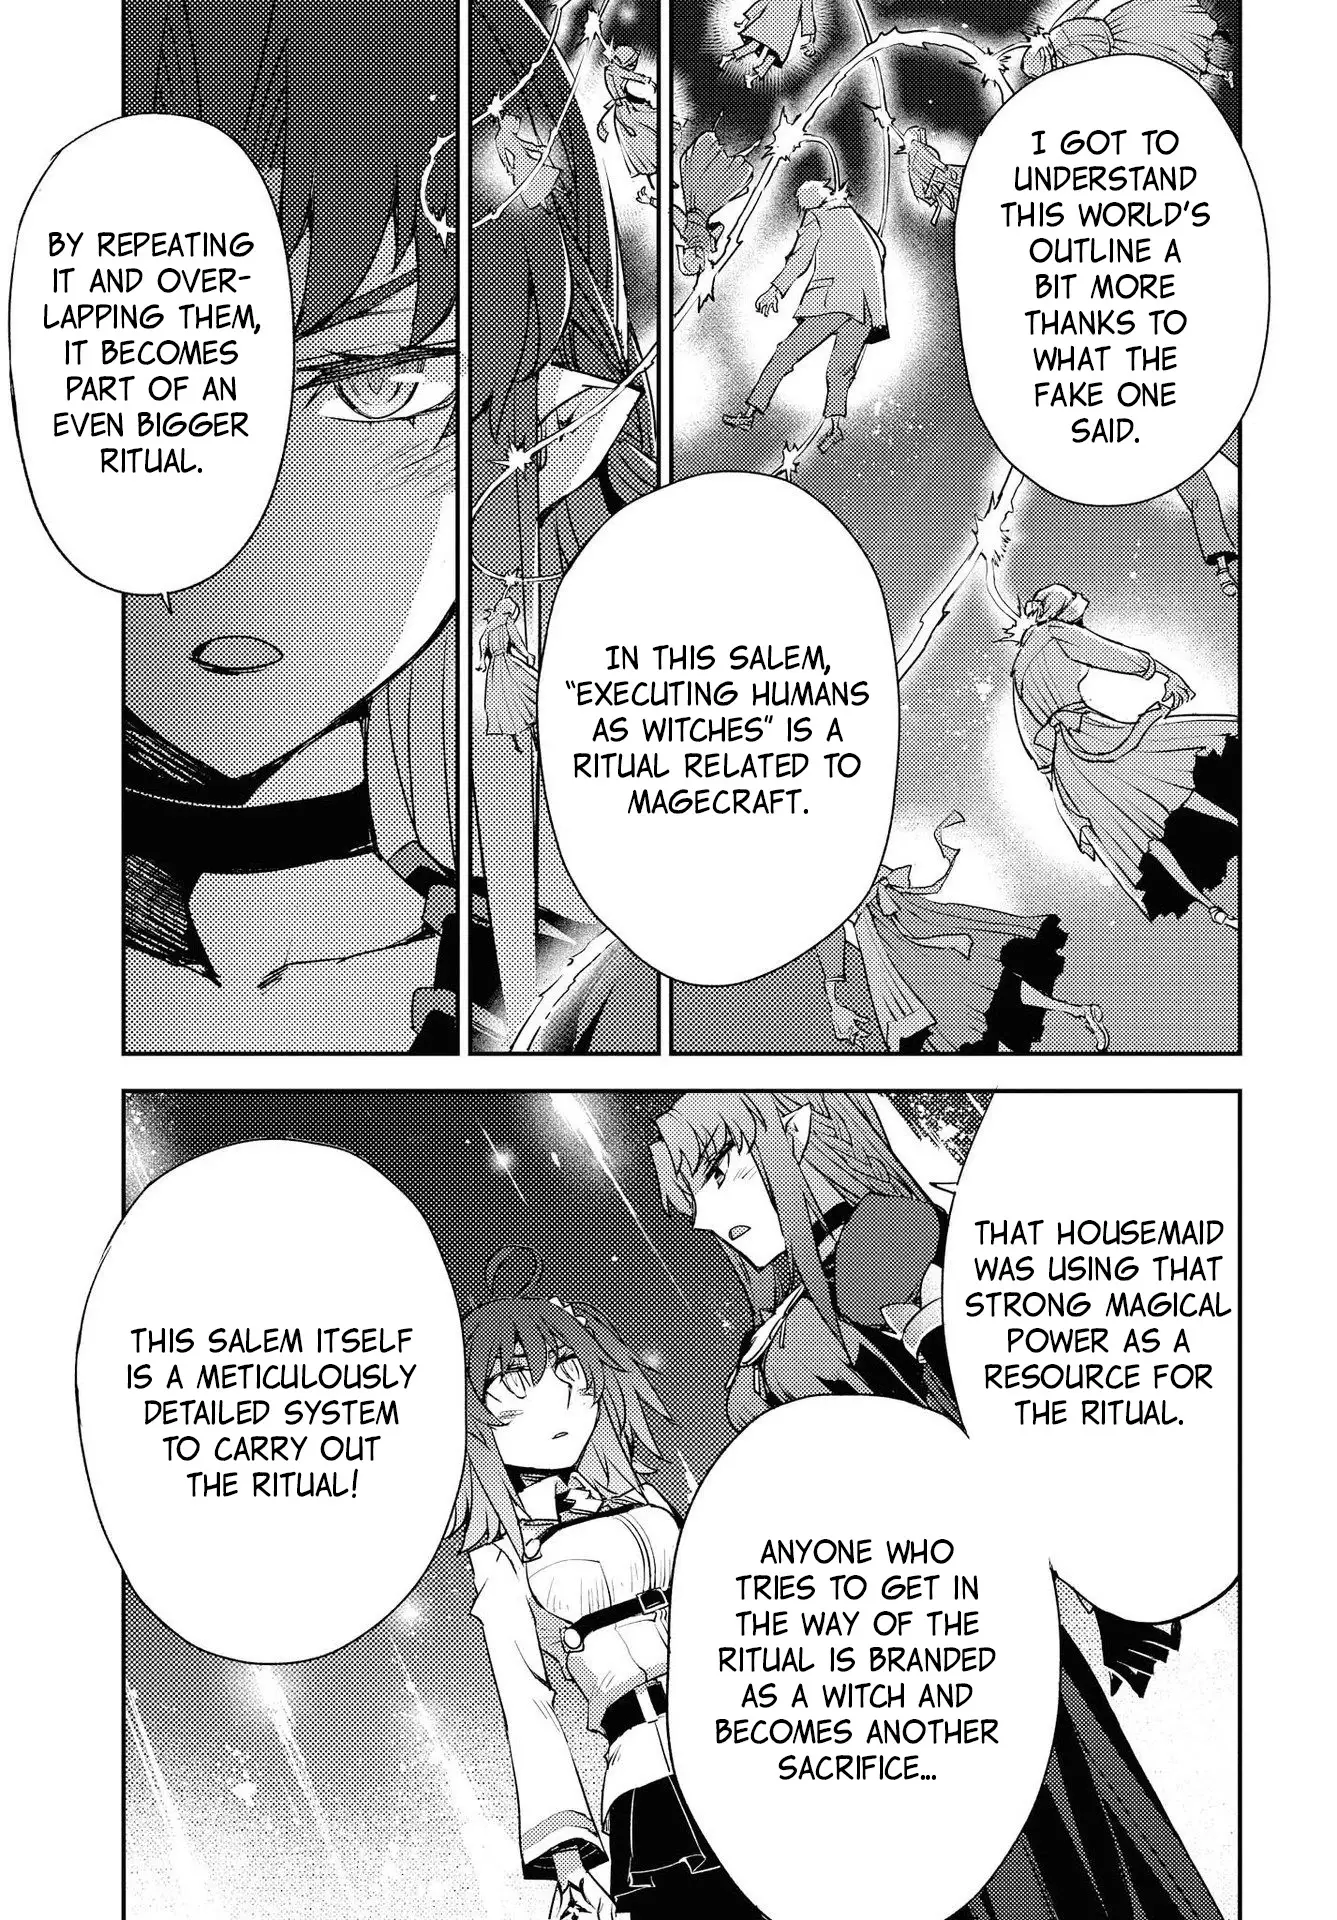 Fate/grand Order: Epic Of Remnant - Subspecies Singularity Iv: Taboo Advent Salem: Salem Of Heresy - 12 page 5